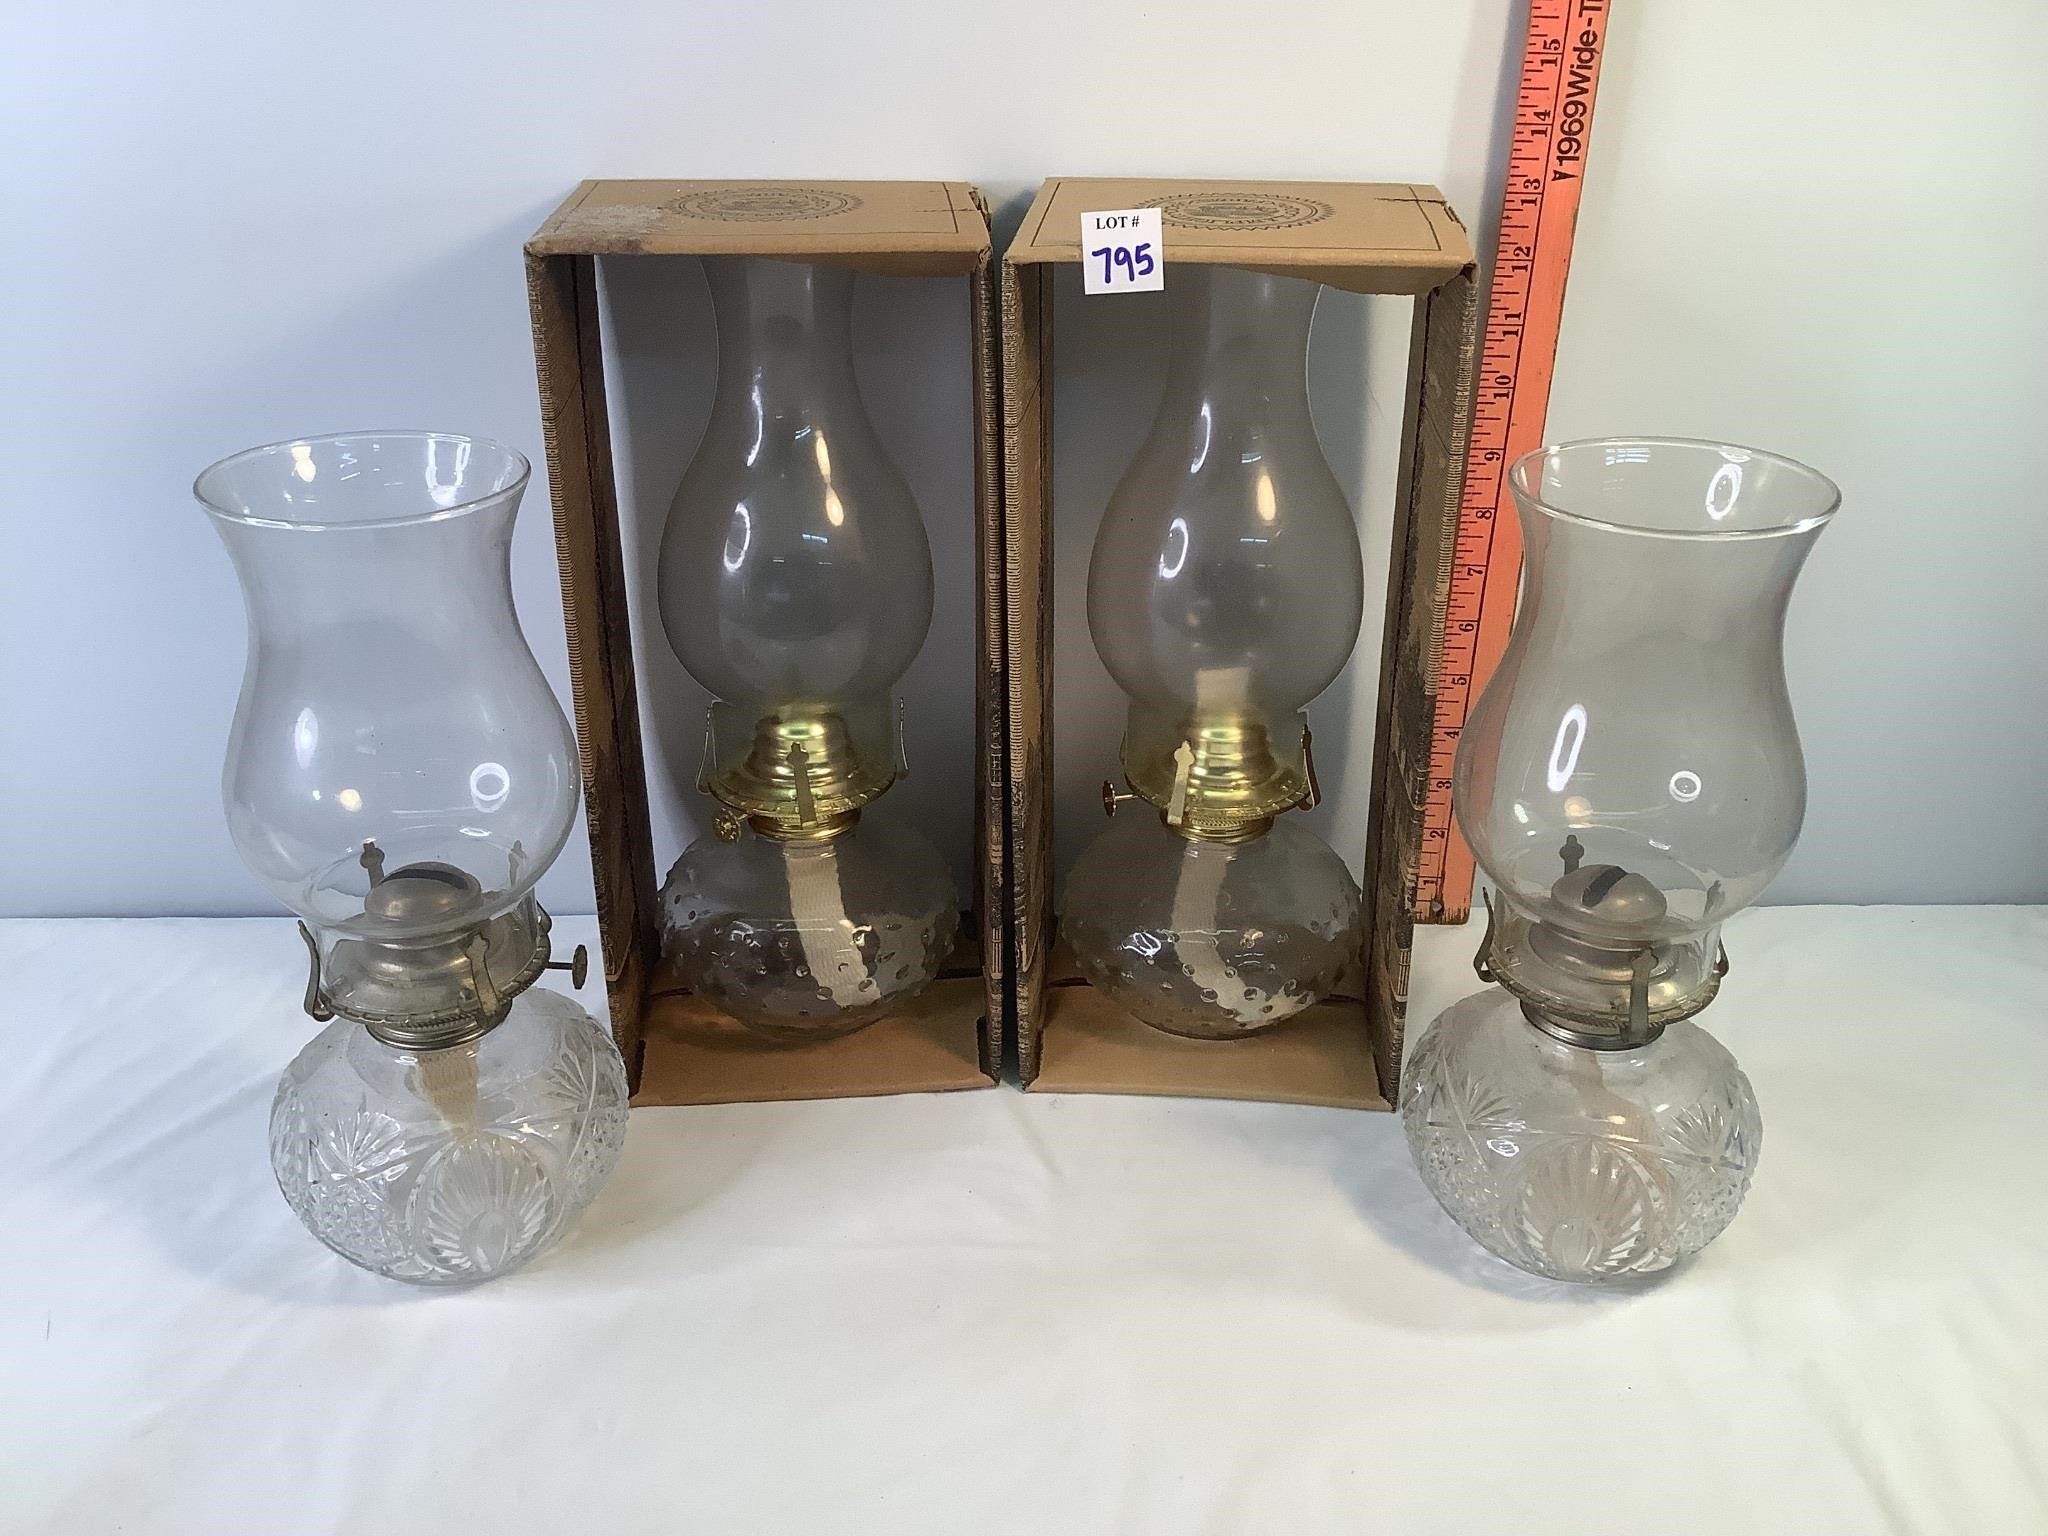 Frye and Selders Online Estate Auction